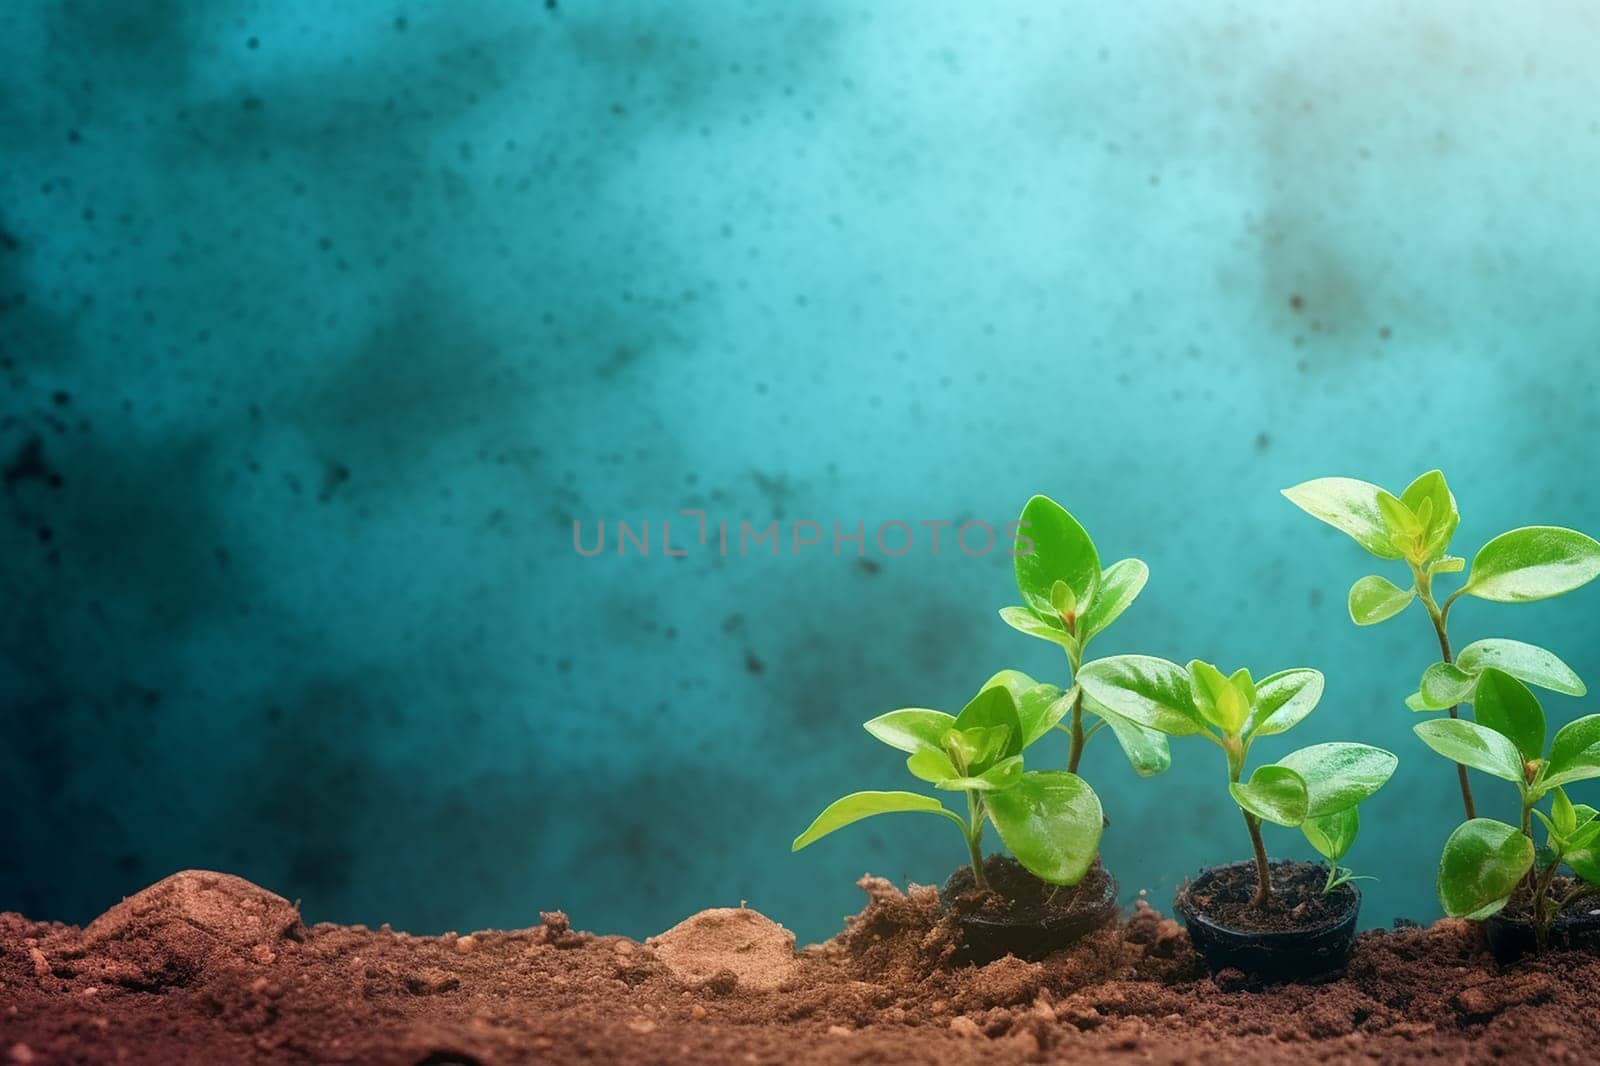 Small plants growing in soil against a blue background.